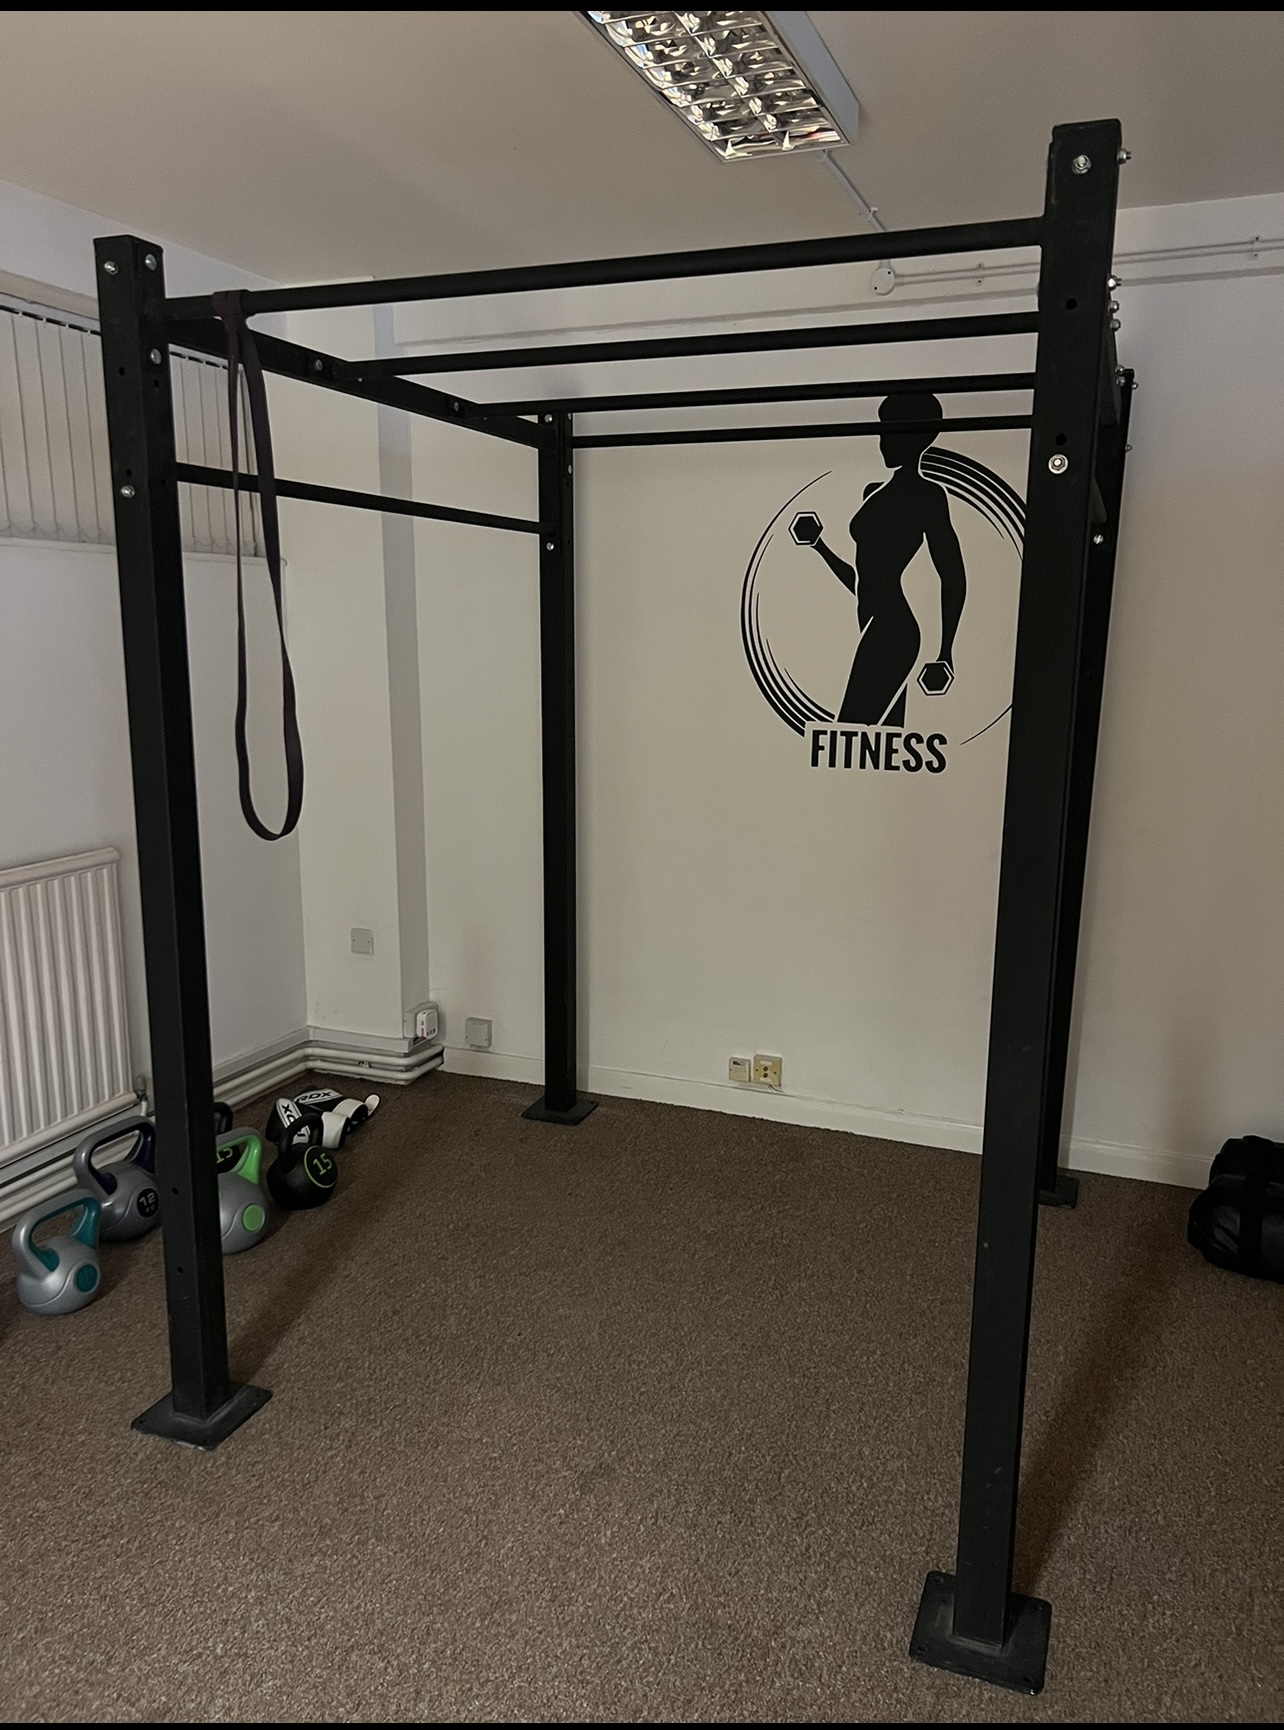 A PROFESSIONAL GYM POWER FRAME, SIZE APPROX - HEIGHT 2.2M, WIDTH 1.